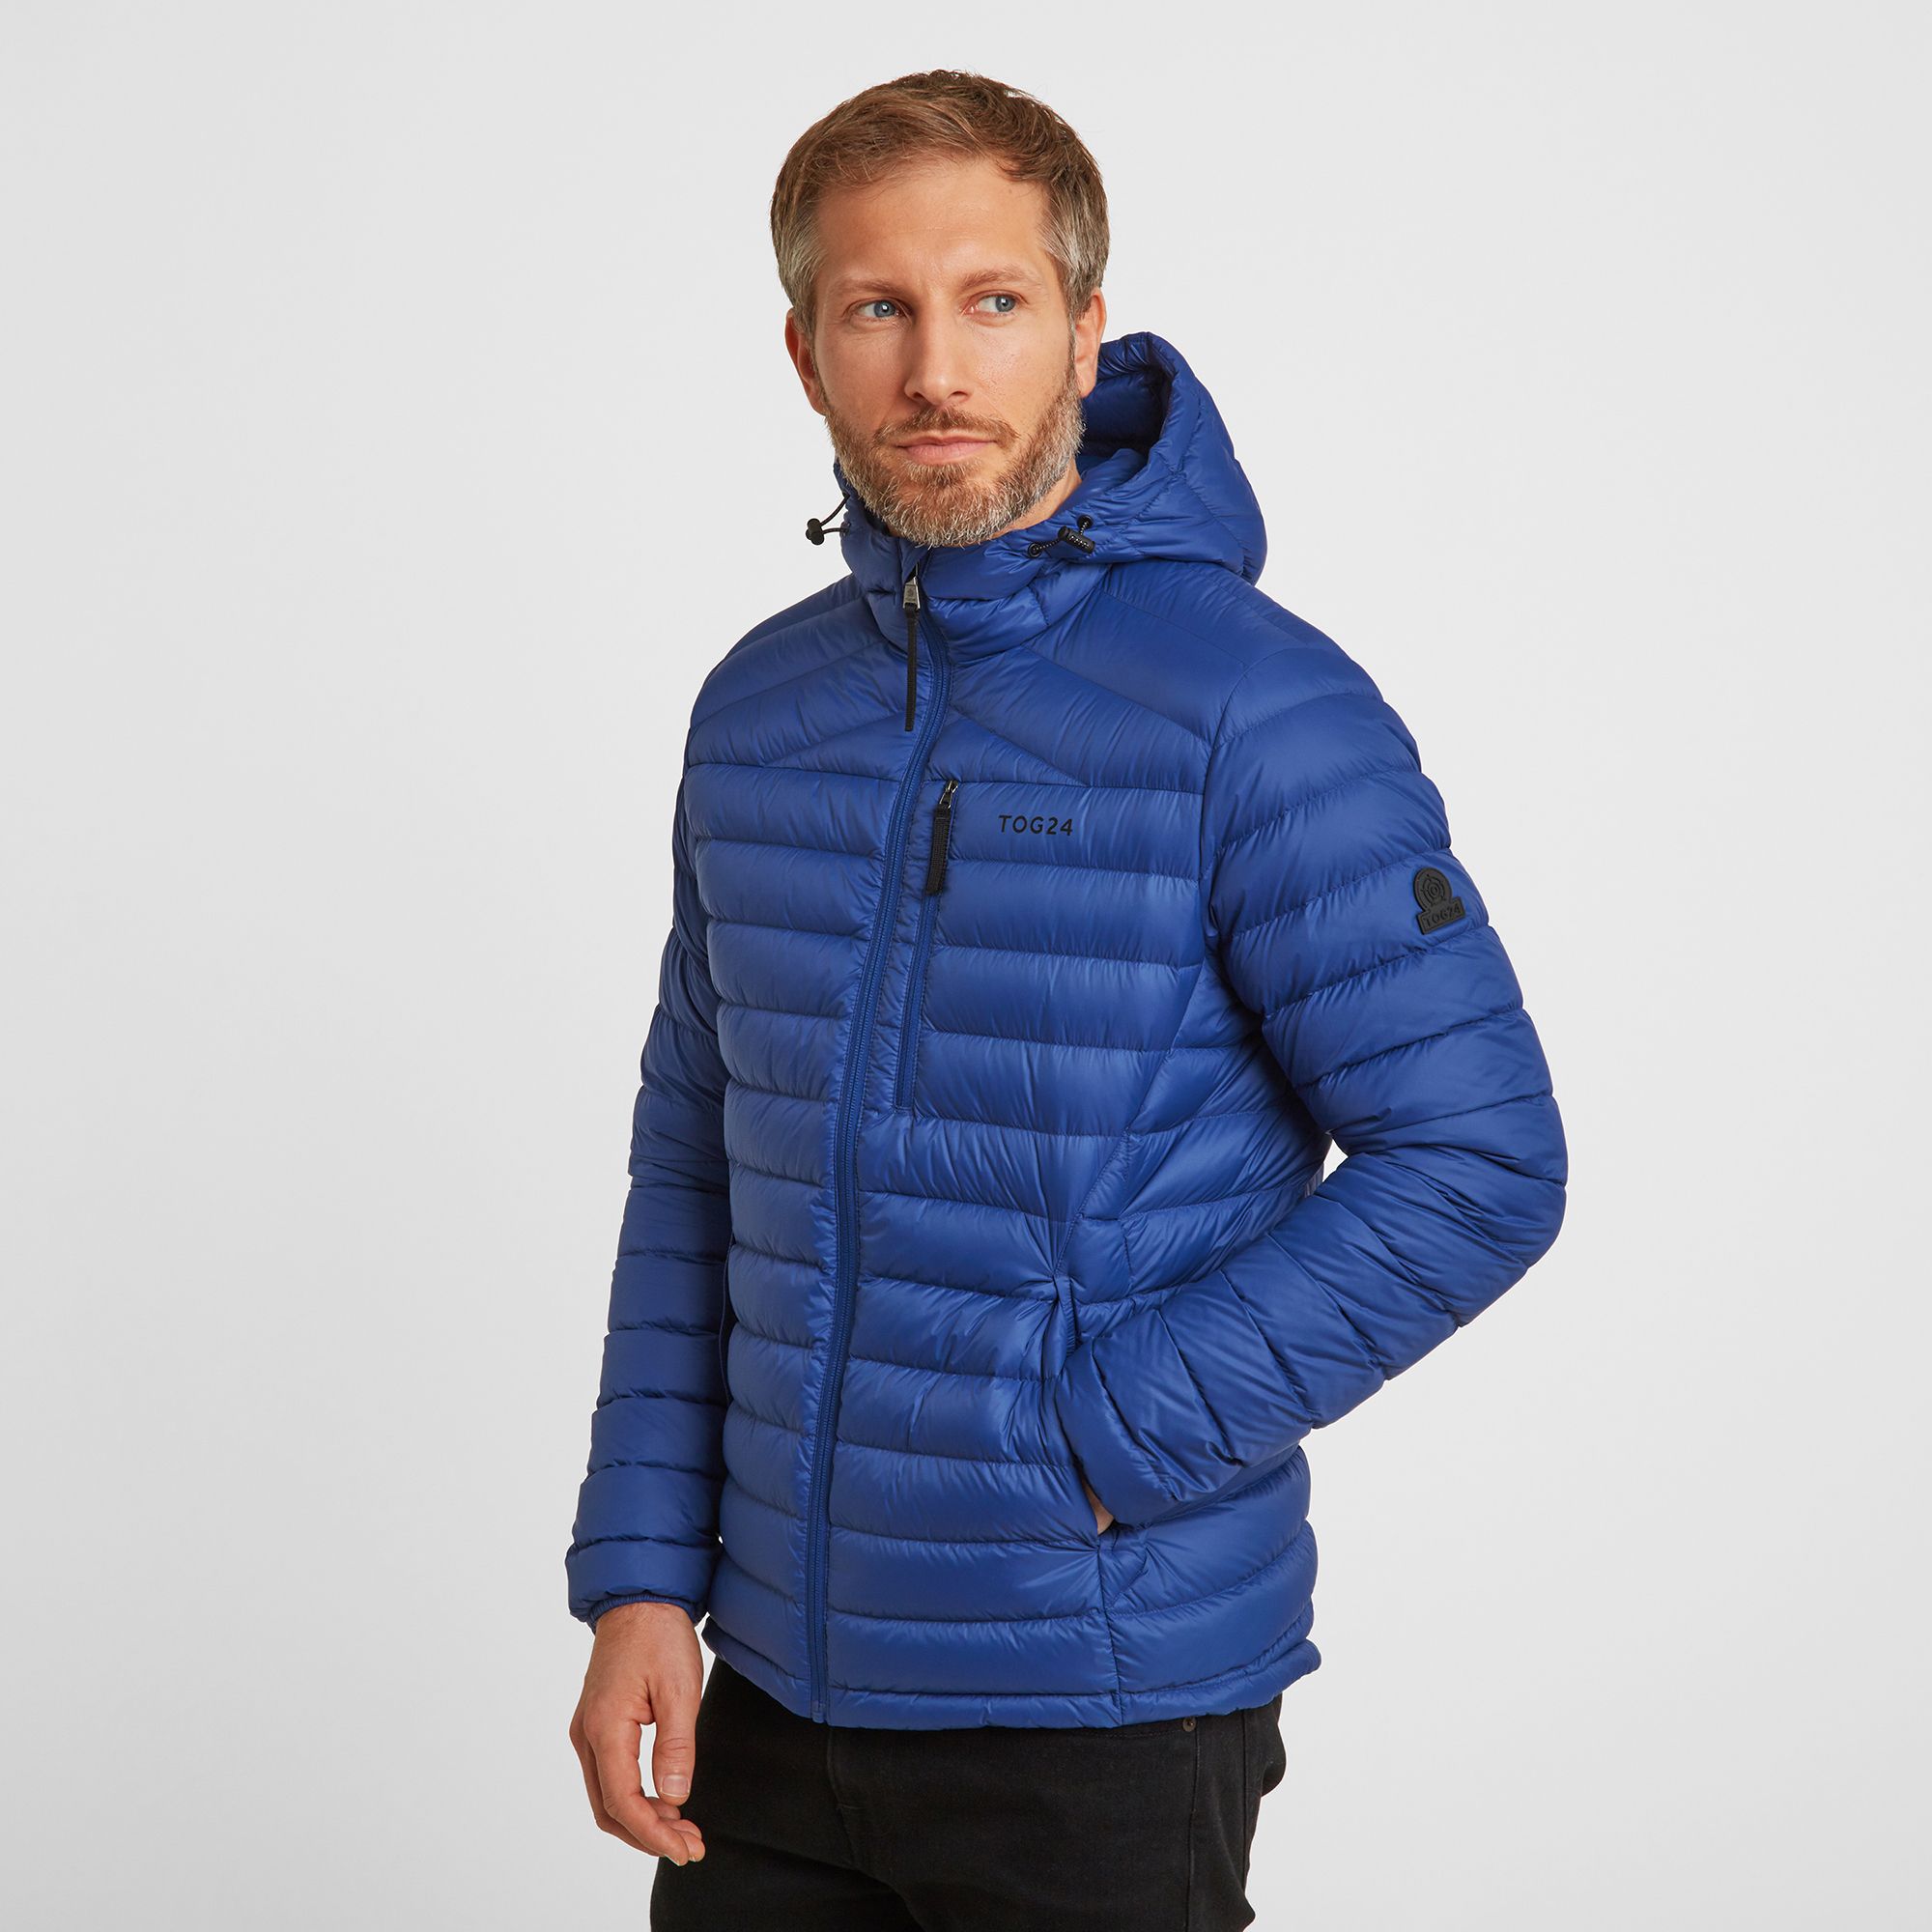 Perfect for adding a layer of warmth without any bulk, our Drax down filled mens jacket with adjustable hood feels silky-soft, incredibly light and packs down small into a zip up inside pocket. You'll have no trouble finding room for it in your case when you go away, and it also makes a handy travel pillow. This padded jacket gets its incredible warmth from naturally insulating duck down that traps heat without being bulky. Quilted bands, a panelled cut and a hood that hugs your neck mean it feels as good as it looks, and it has thoughtful details like a soft chin cover over the top of the zip. Designed to squish down really small, then spring back into shape, Drax has roomy side pockets protected by an elasticated flap, light elastic at the cuffs and small toggle adjusters at the hem keep the chill out.  Designed in Yorkshire, where we always need layers, our Drax mens hooded jacket is ideal for wearing over a top when it's only a bit chilly or layering under a coat when the wind is howling. Reflecting our Spen Valley ethos of Truth Over Glory, it has a TOG24 logo proudly printed on the chest.